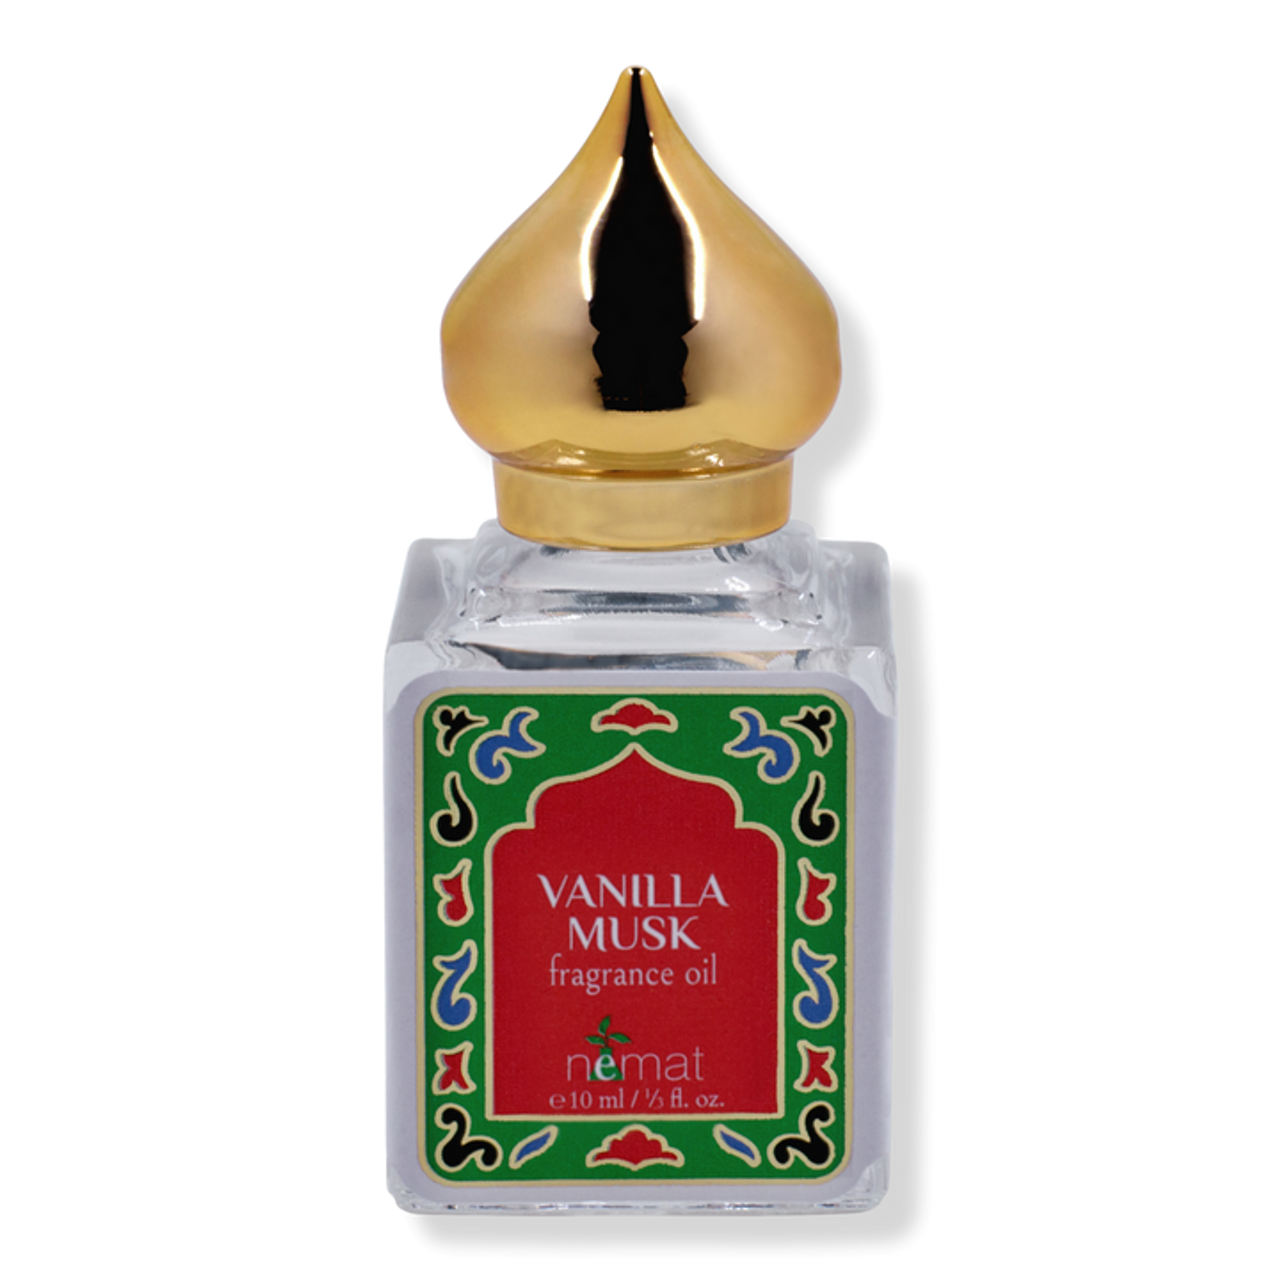 The vanilla musk and amber do smell nice but just not as potent as I e, nemat  perfume oil